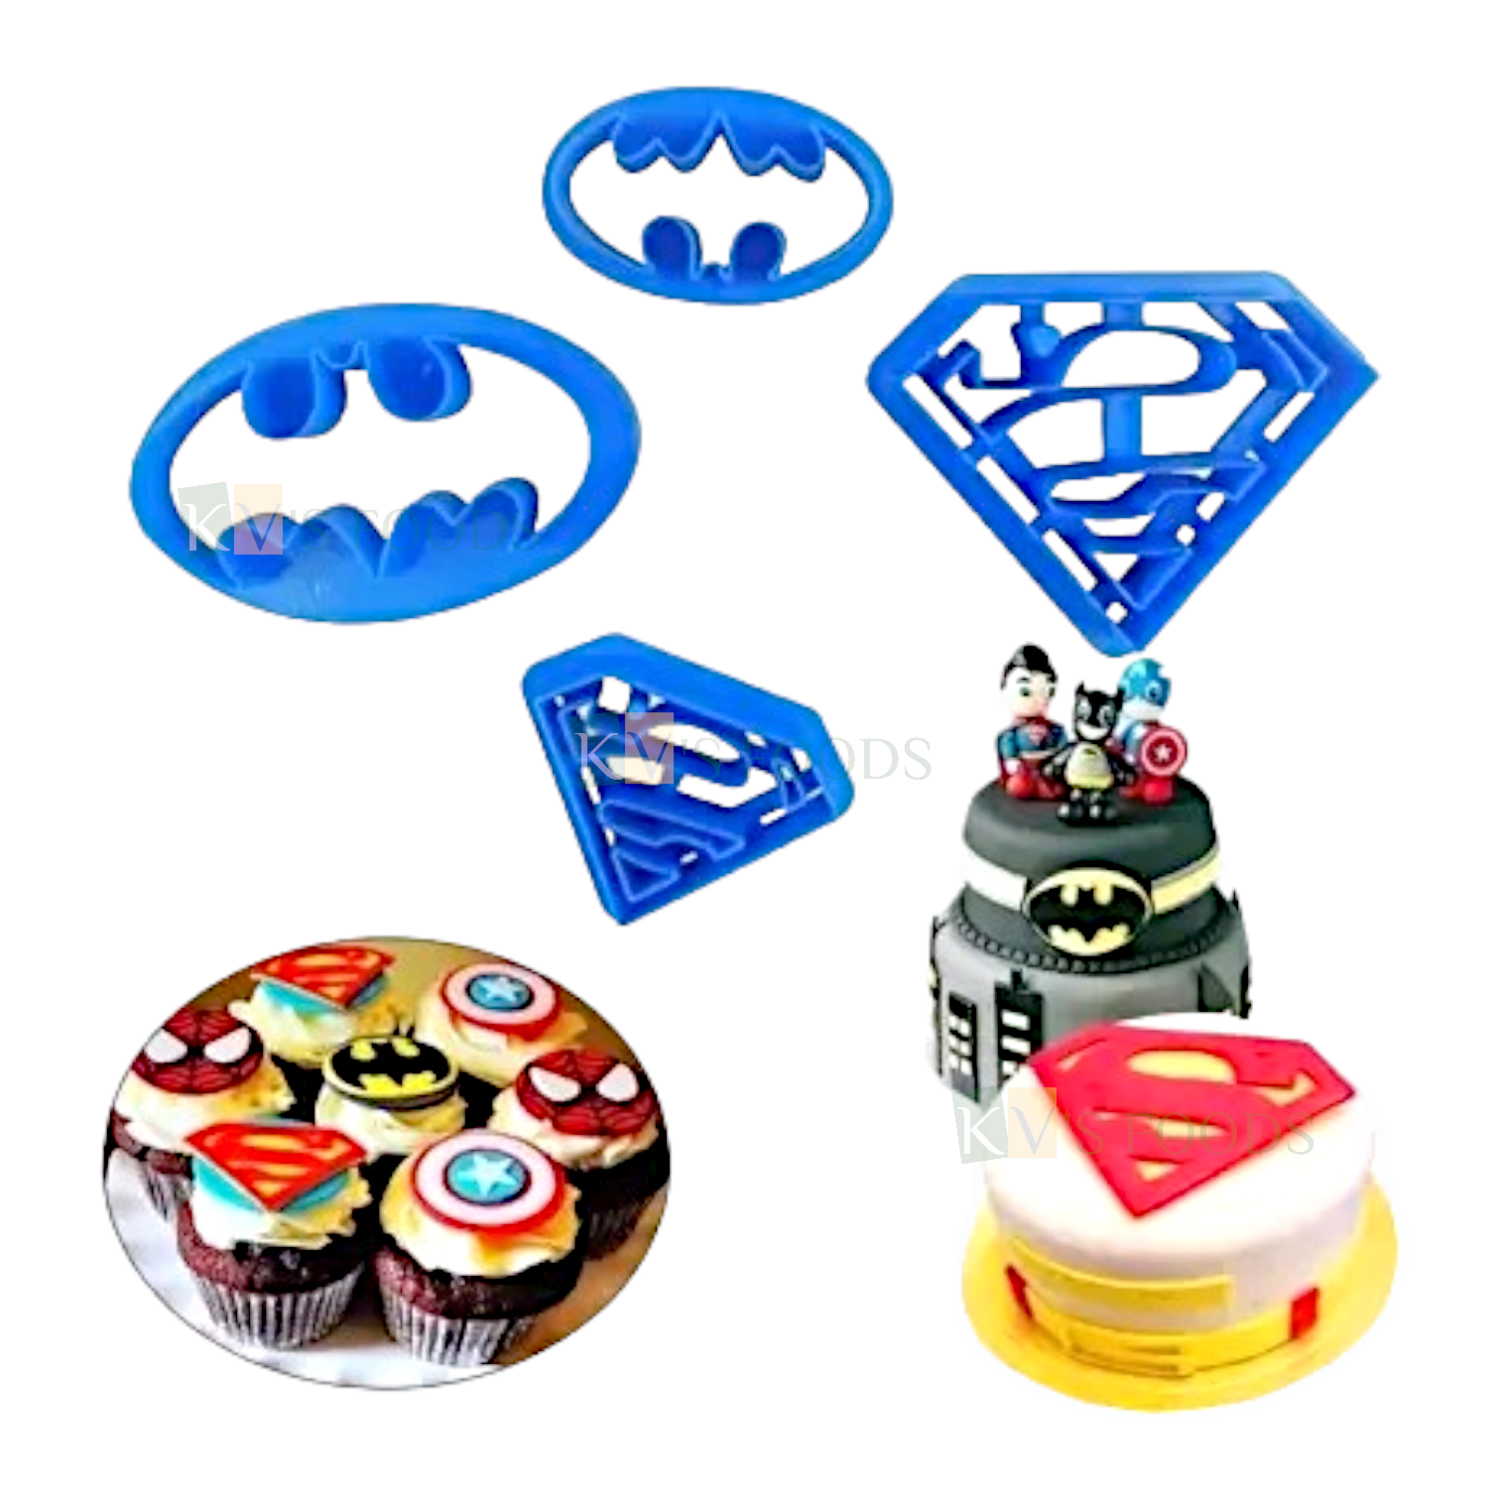 4 PCS Blue Superman Super Hero Batman Logo Fondant Cutters Stamps, Plunger Molds Embossing Mold Printed Presses Impression, Chocolates Pancake Cookies Boys Mens Birthday Party Cake Cupcake Decorations